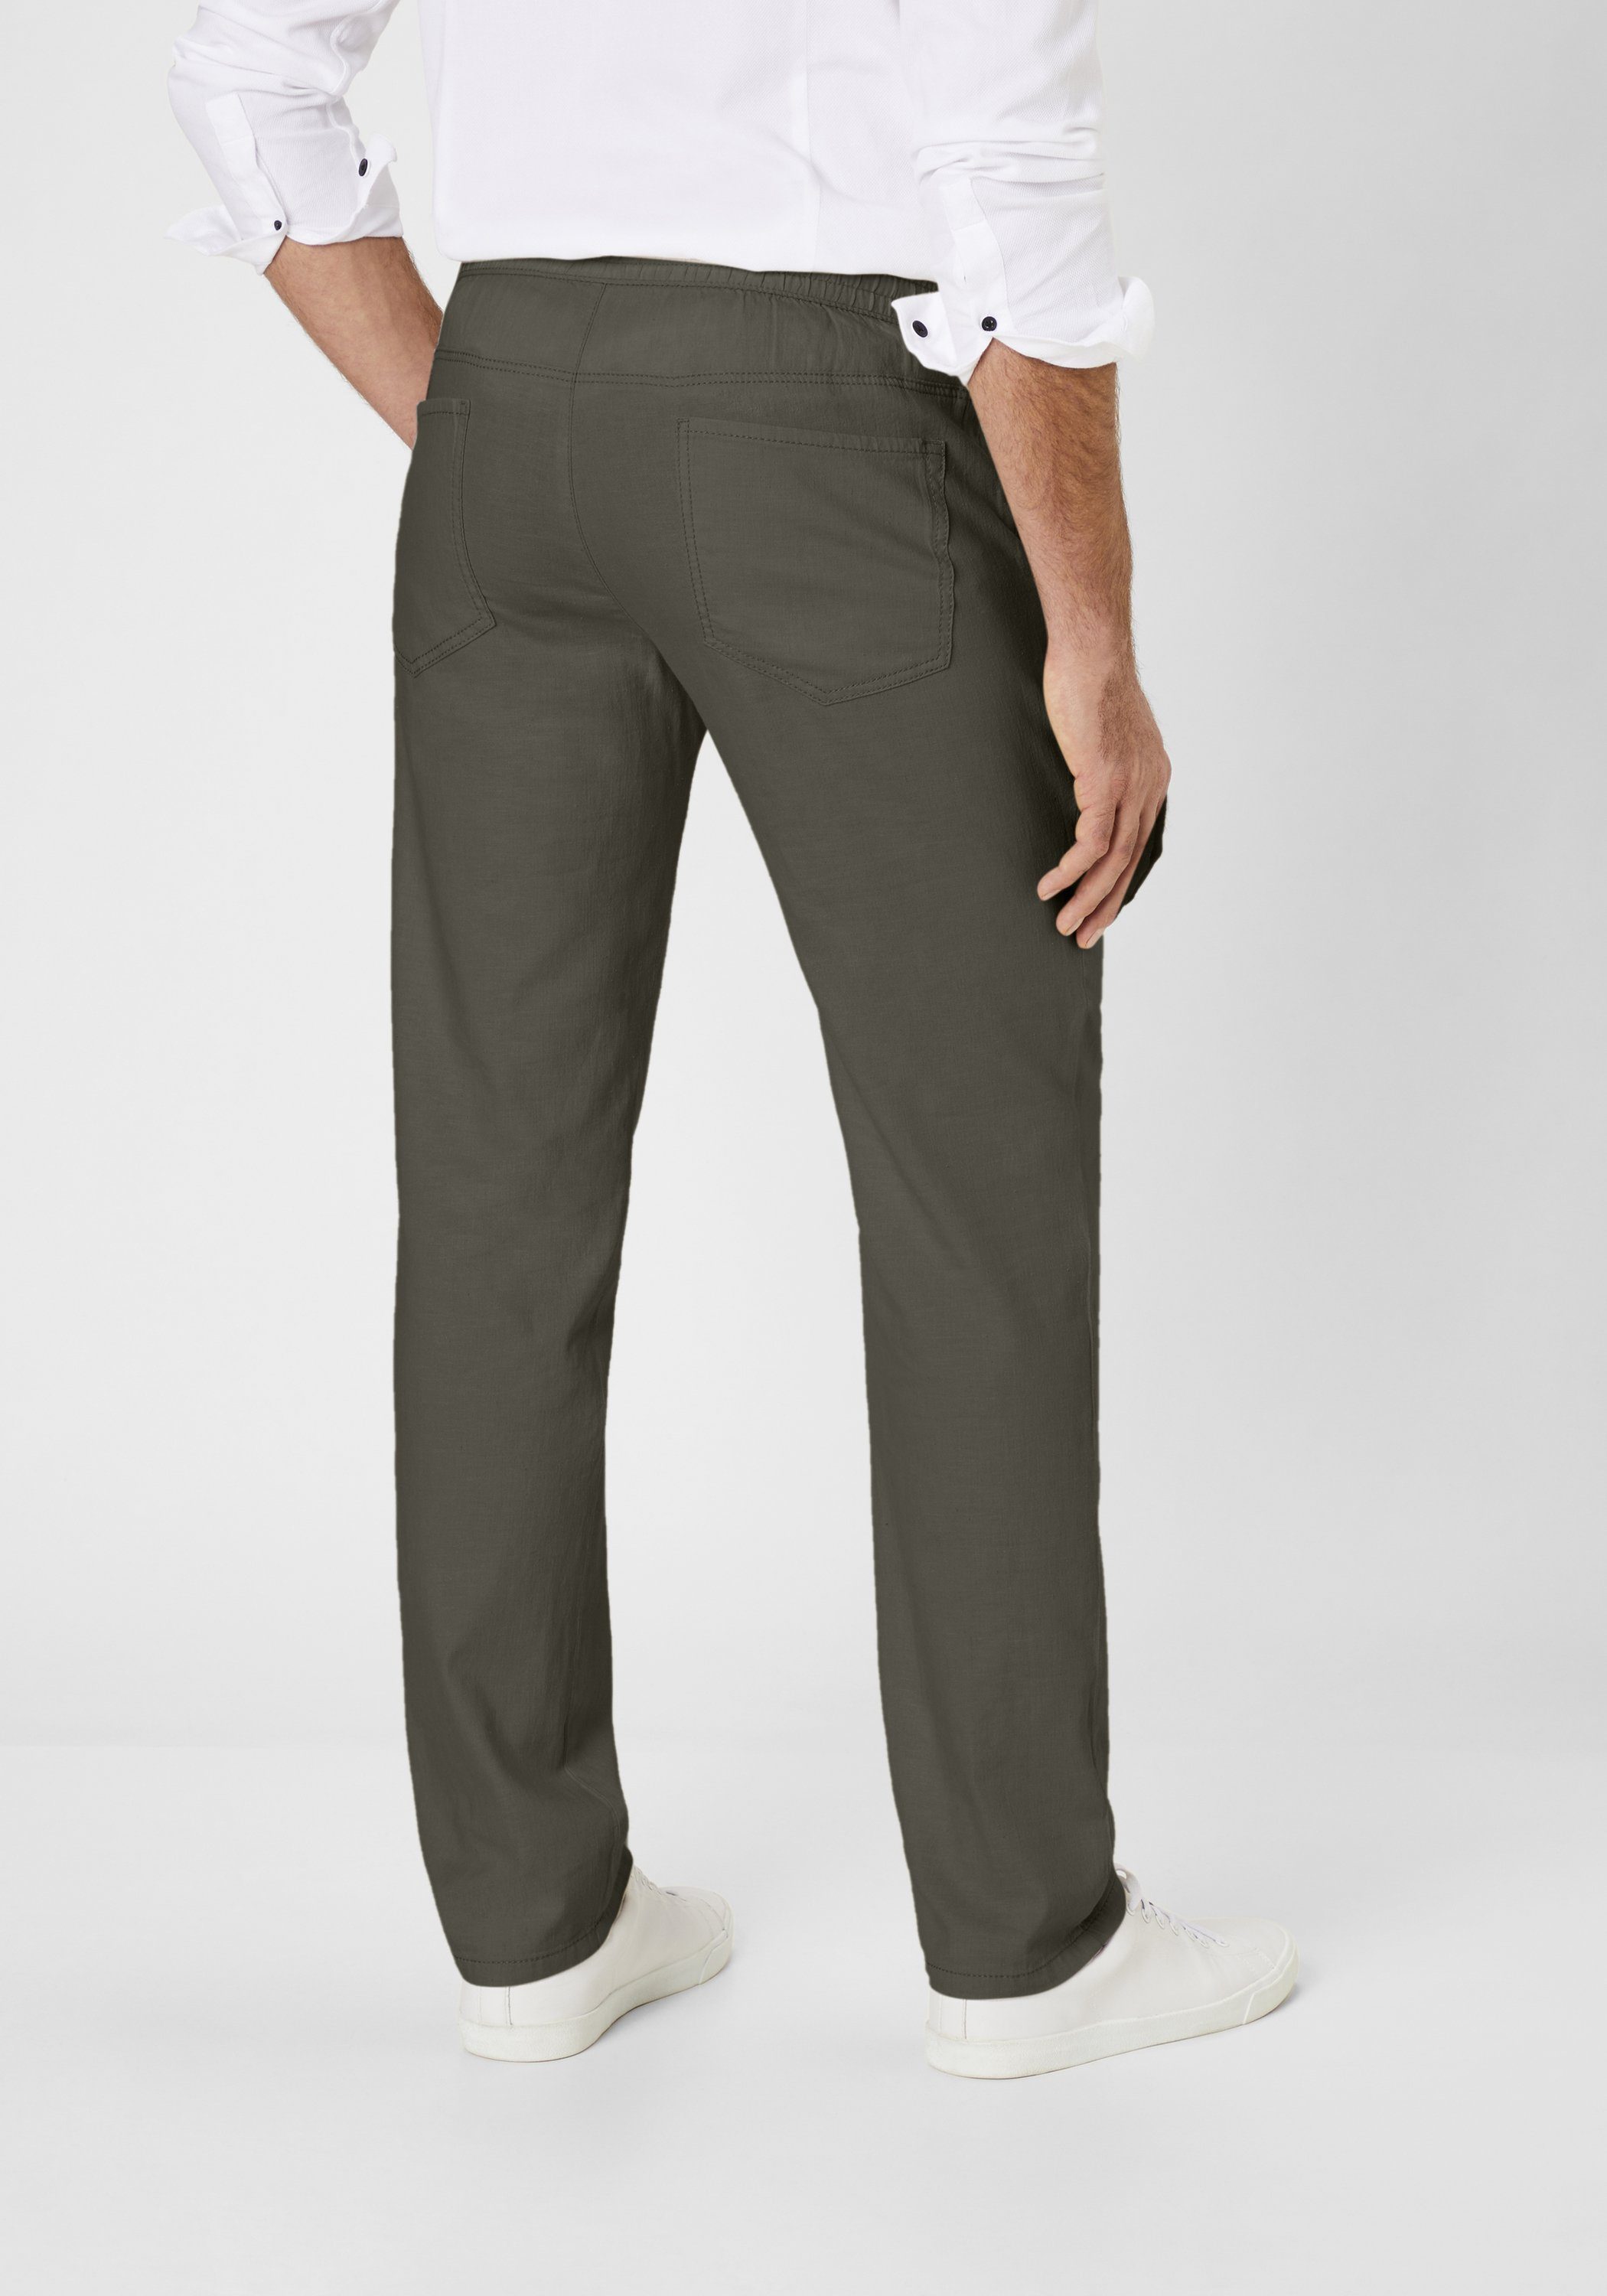 Redpoint Sehr oliv Stretch-Chinohose Carden leichte Chinohose